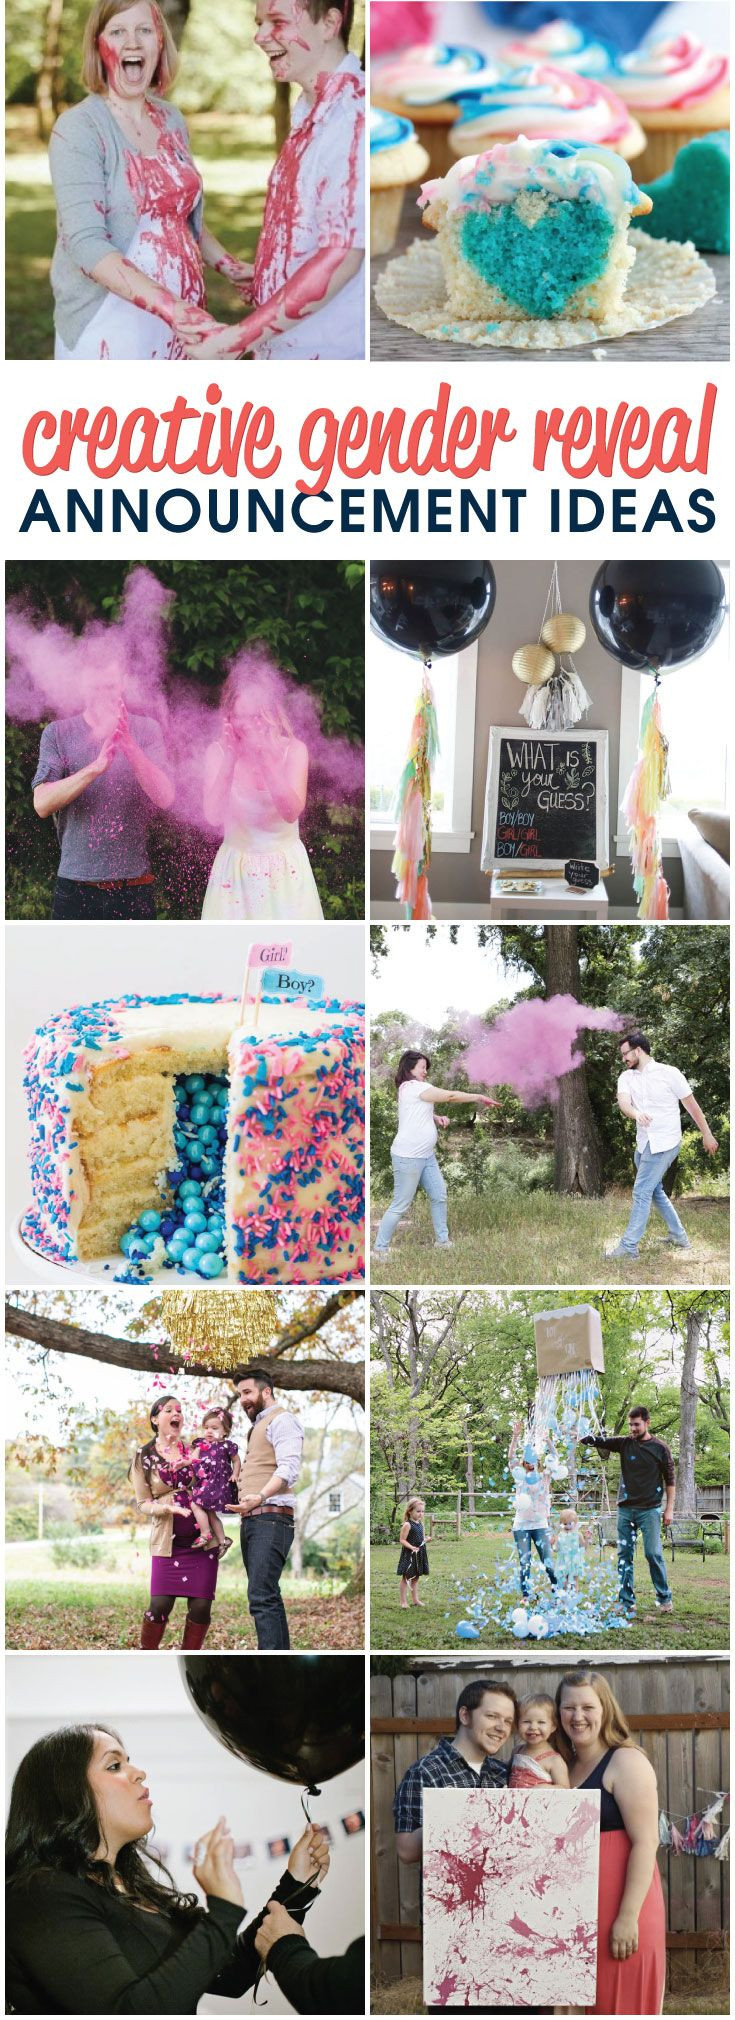 Creative Ideas For Gender Reveal Party
 1000 images about Gender Reveal Party Ideas on Pinterest